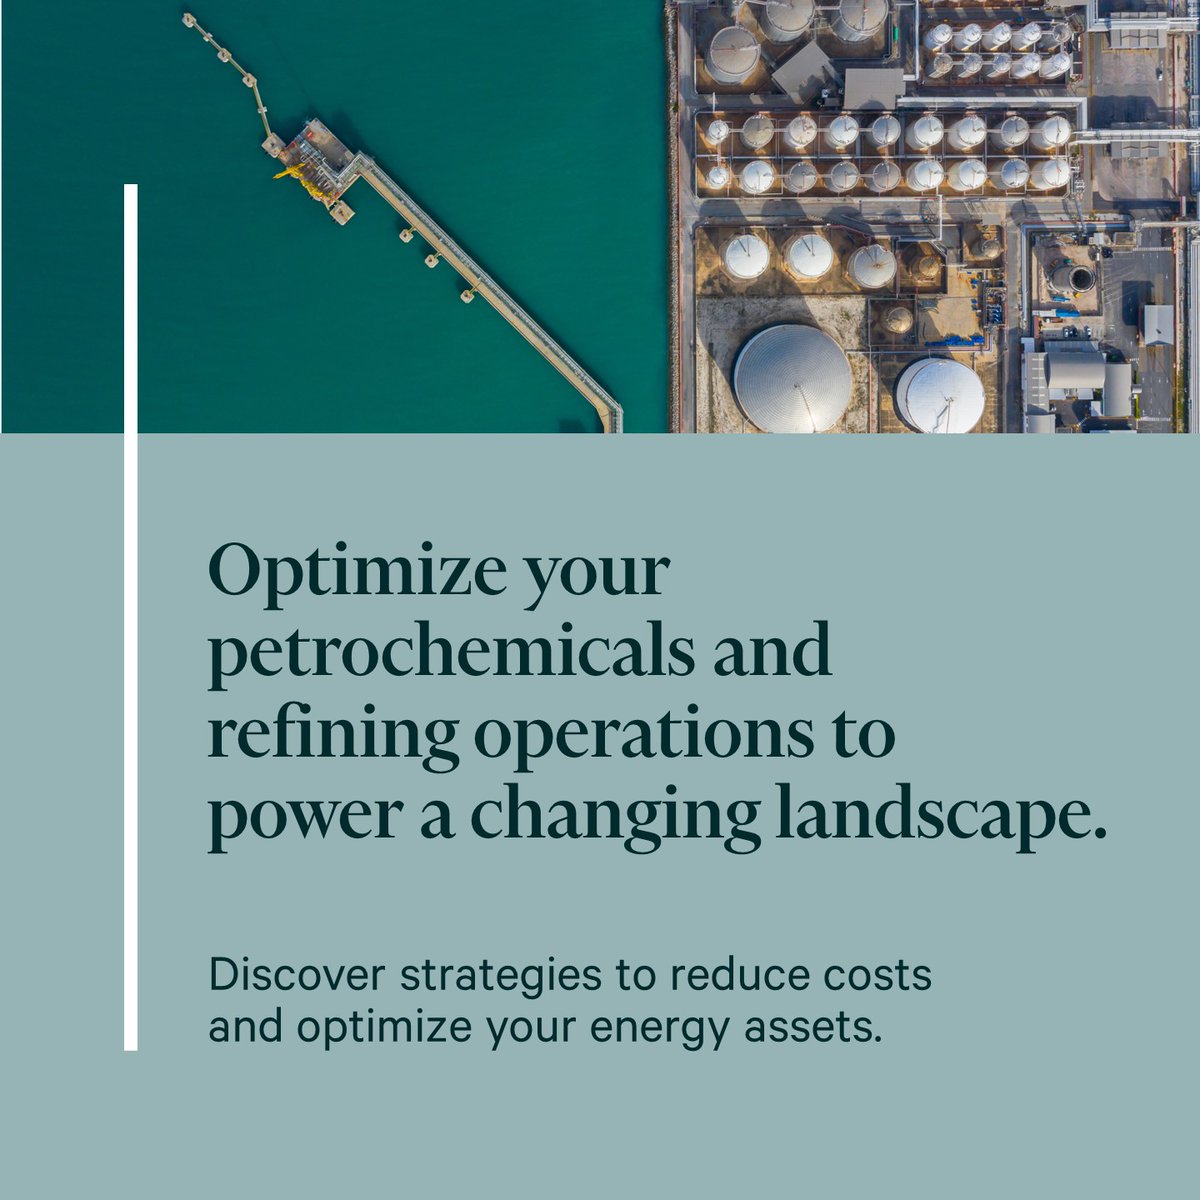 As the world transitions to greener energy and materials sources, petrochemical and refining companies are transforming their operations to keep pace with rapid change. Learn how an integrated portfolio strategy can drive long-term, #sustainable growth. cbre.co/3Uygn8b